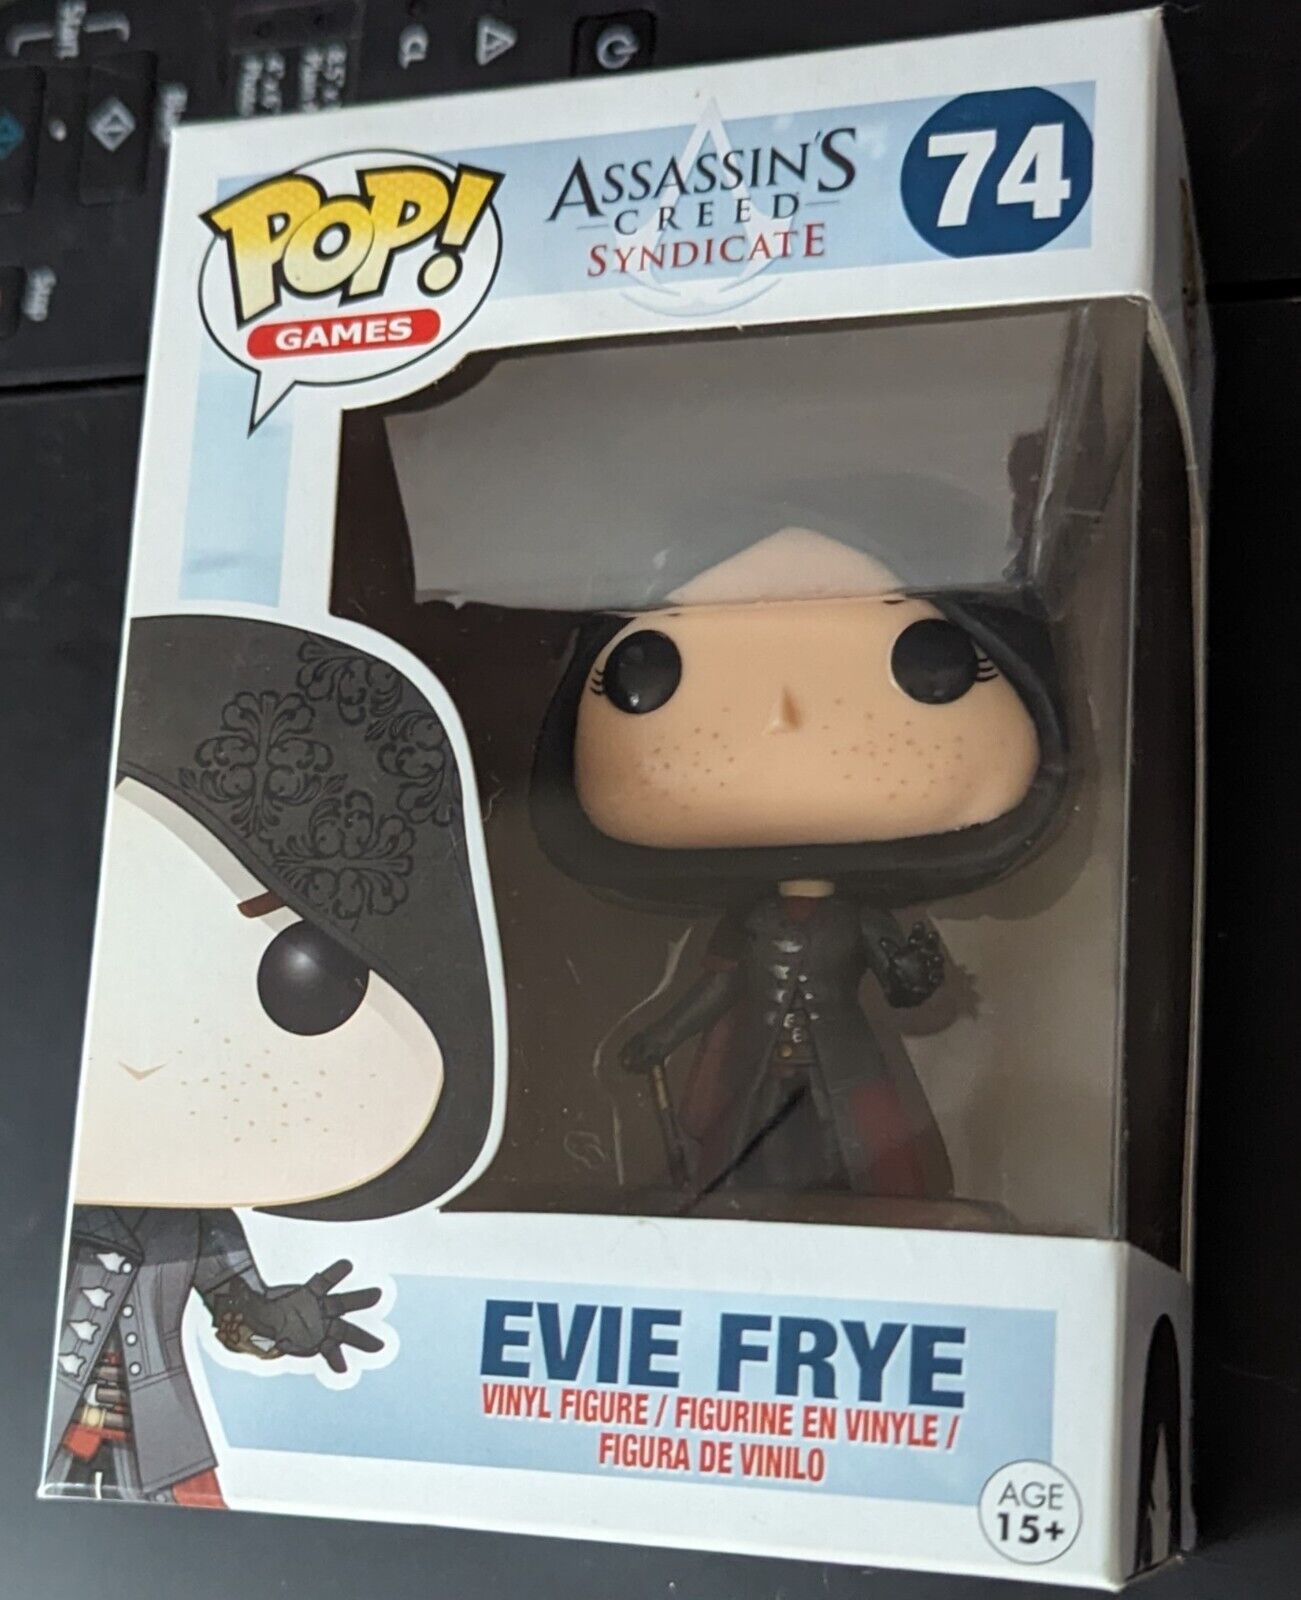 FUNKO POP ASSASSINS CREED SYNDICATE EVIE FRYE #74 UNOPENED BOX